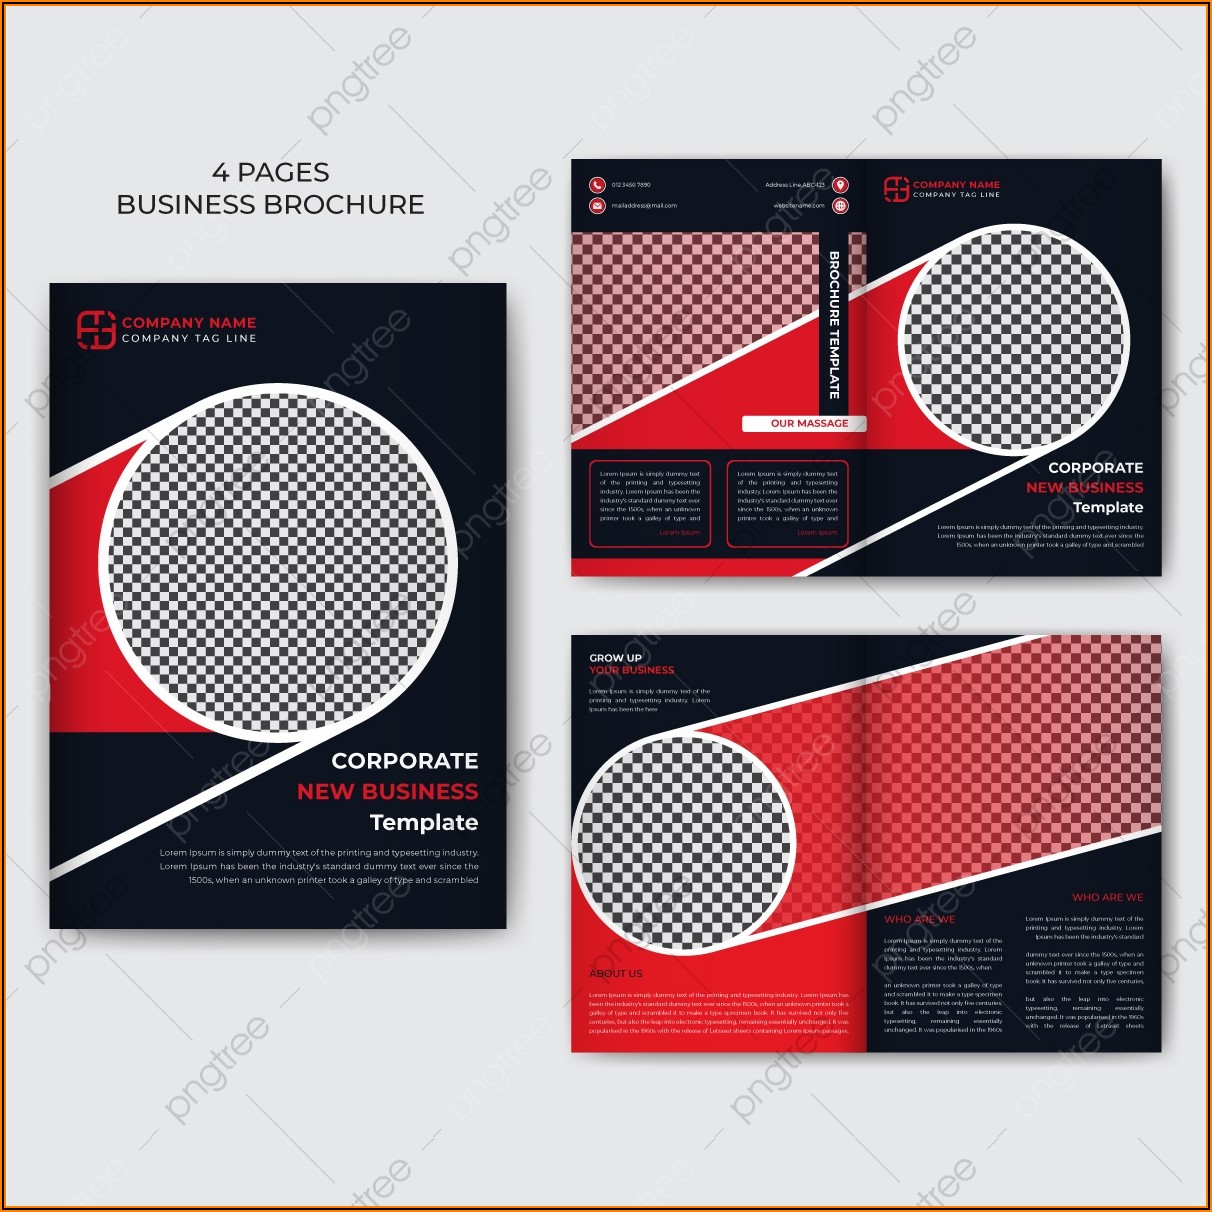 4 Pages Brochure Template